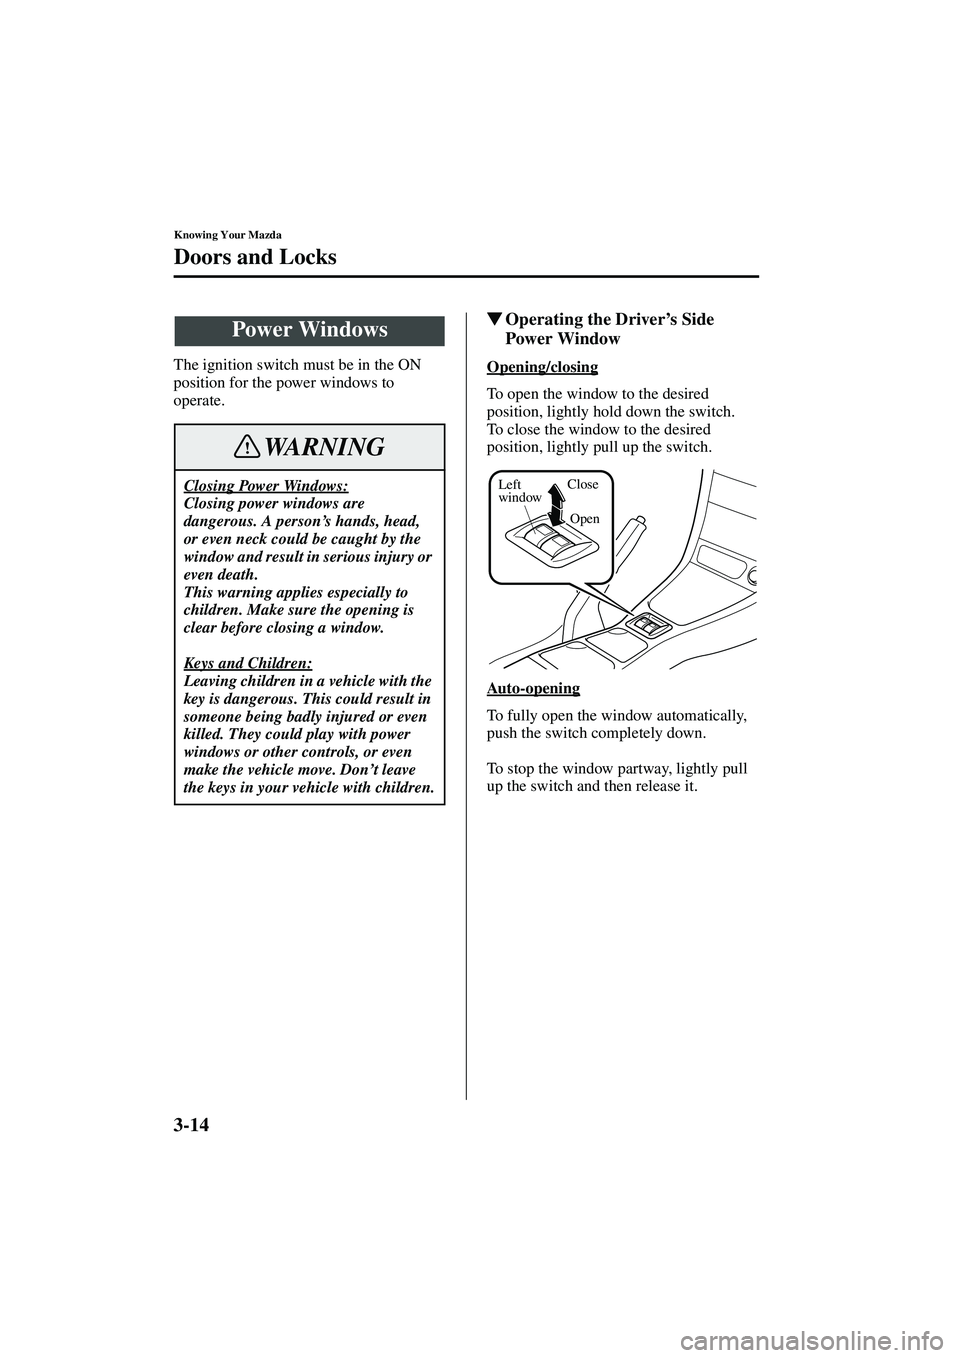 MAZDA MODEL MX-5 MIATA 2004 Workshop Manual 3-14
Knowing Your Mazda
Doors and Locks
Form No. 8S15-EA-03G
The ignition switch must be in the ON 
position for the power windows to 
operate.
Operating the Driver’s Side 
Power Window
Opening/clo